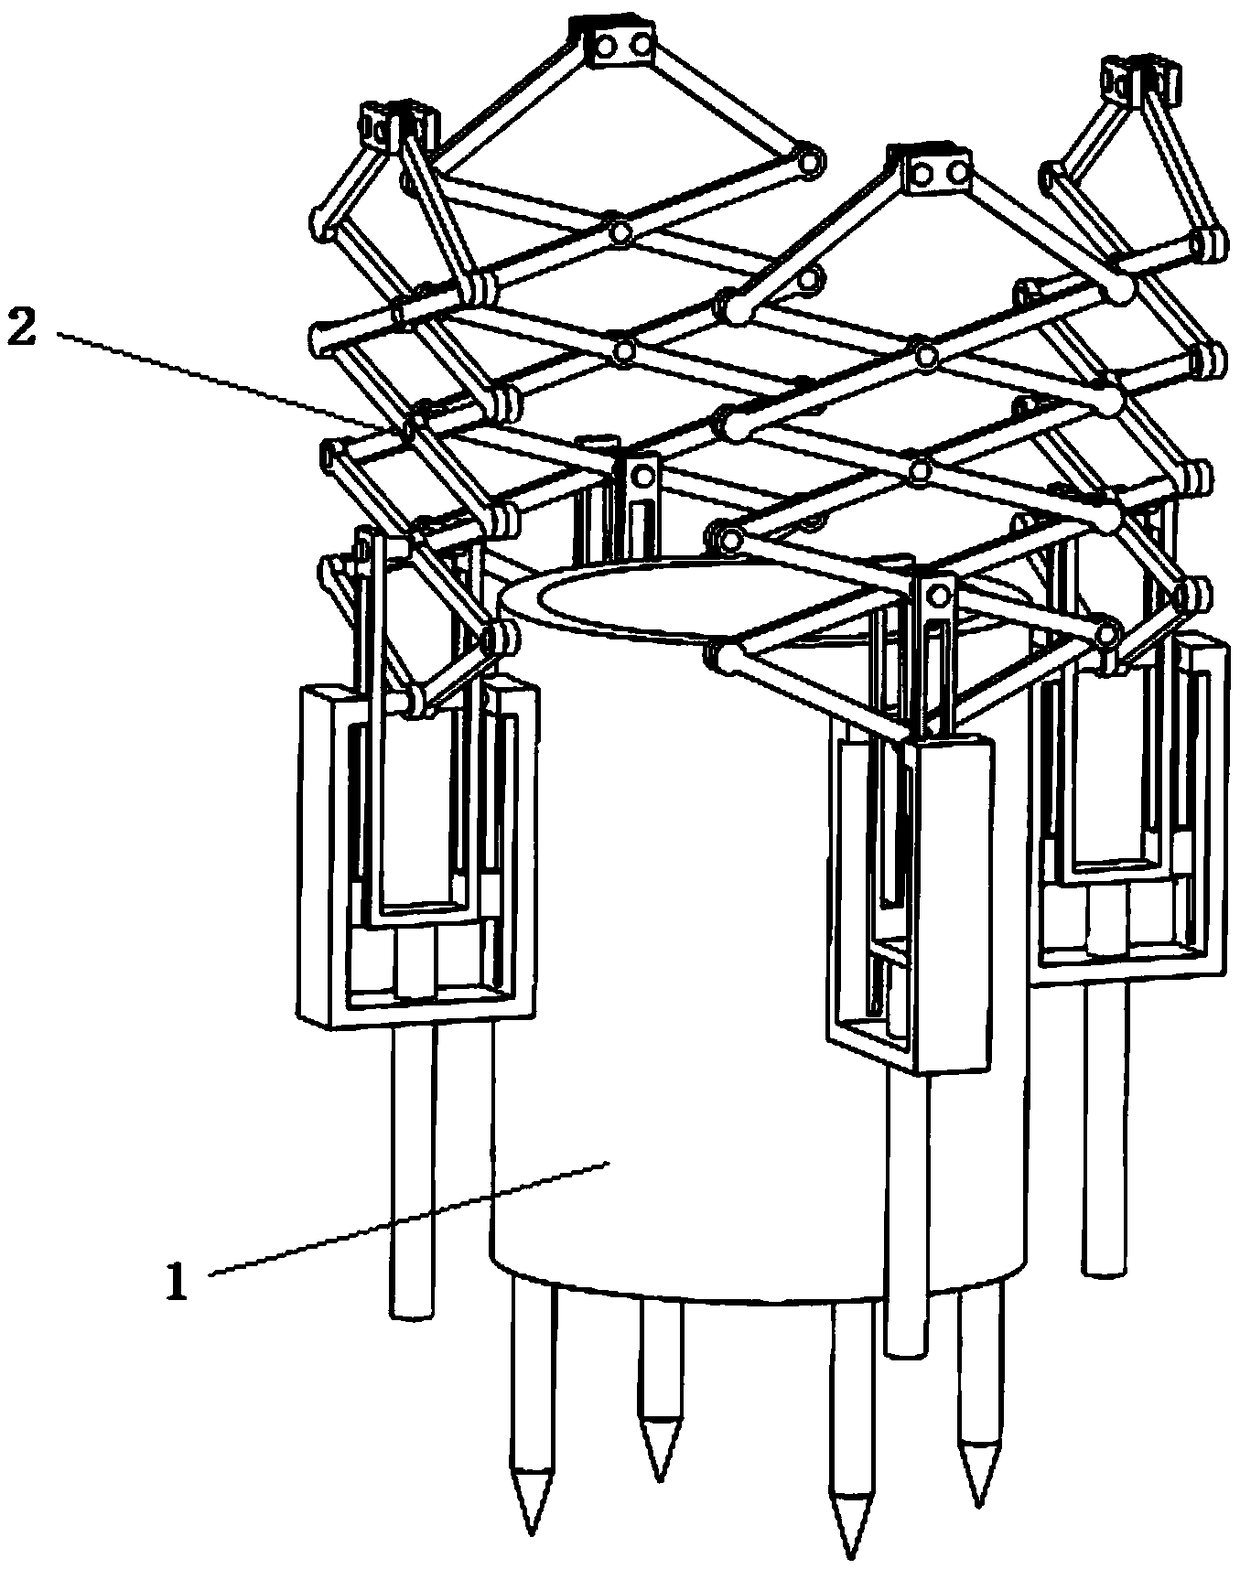 Supporting frame structure for fruit tree